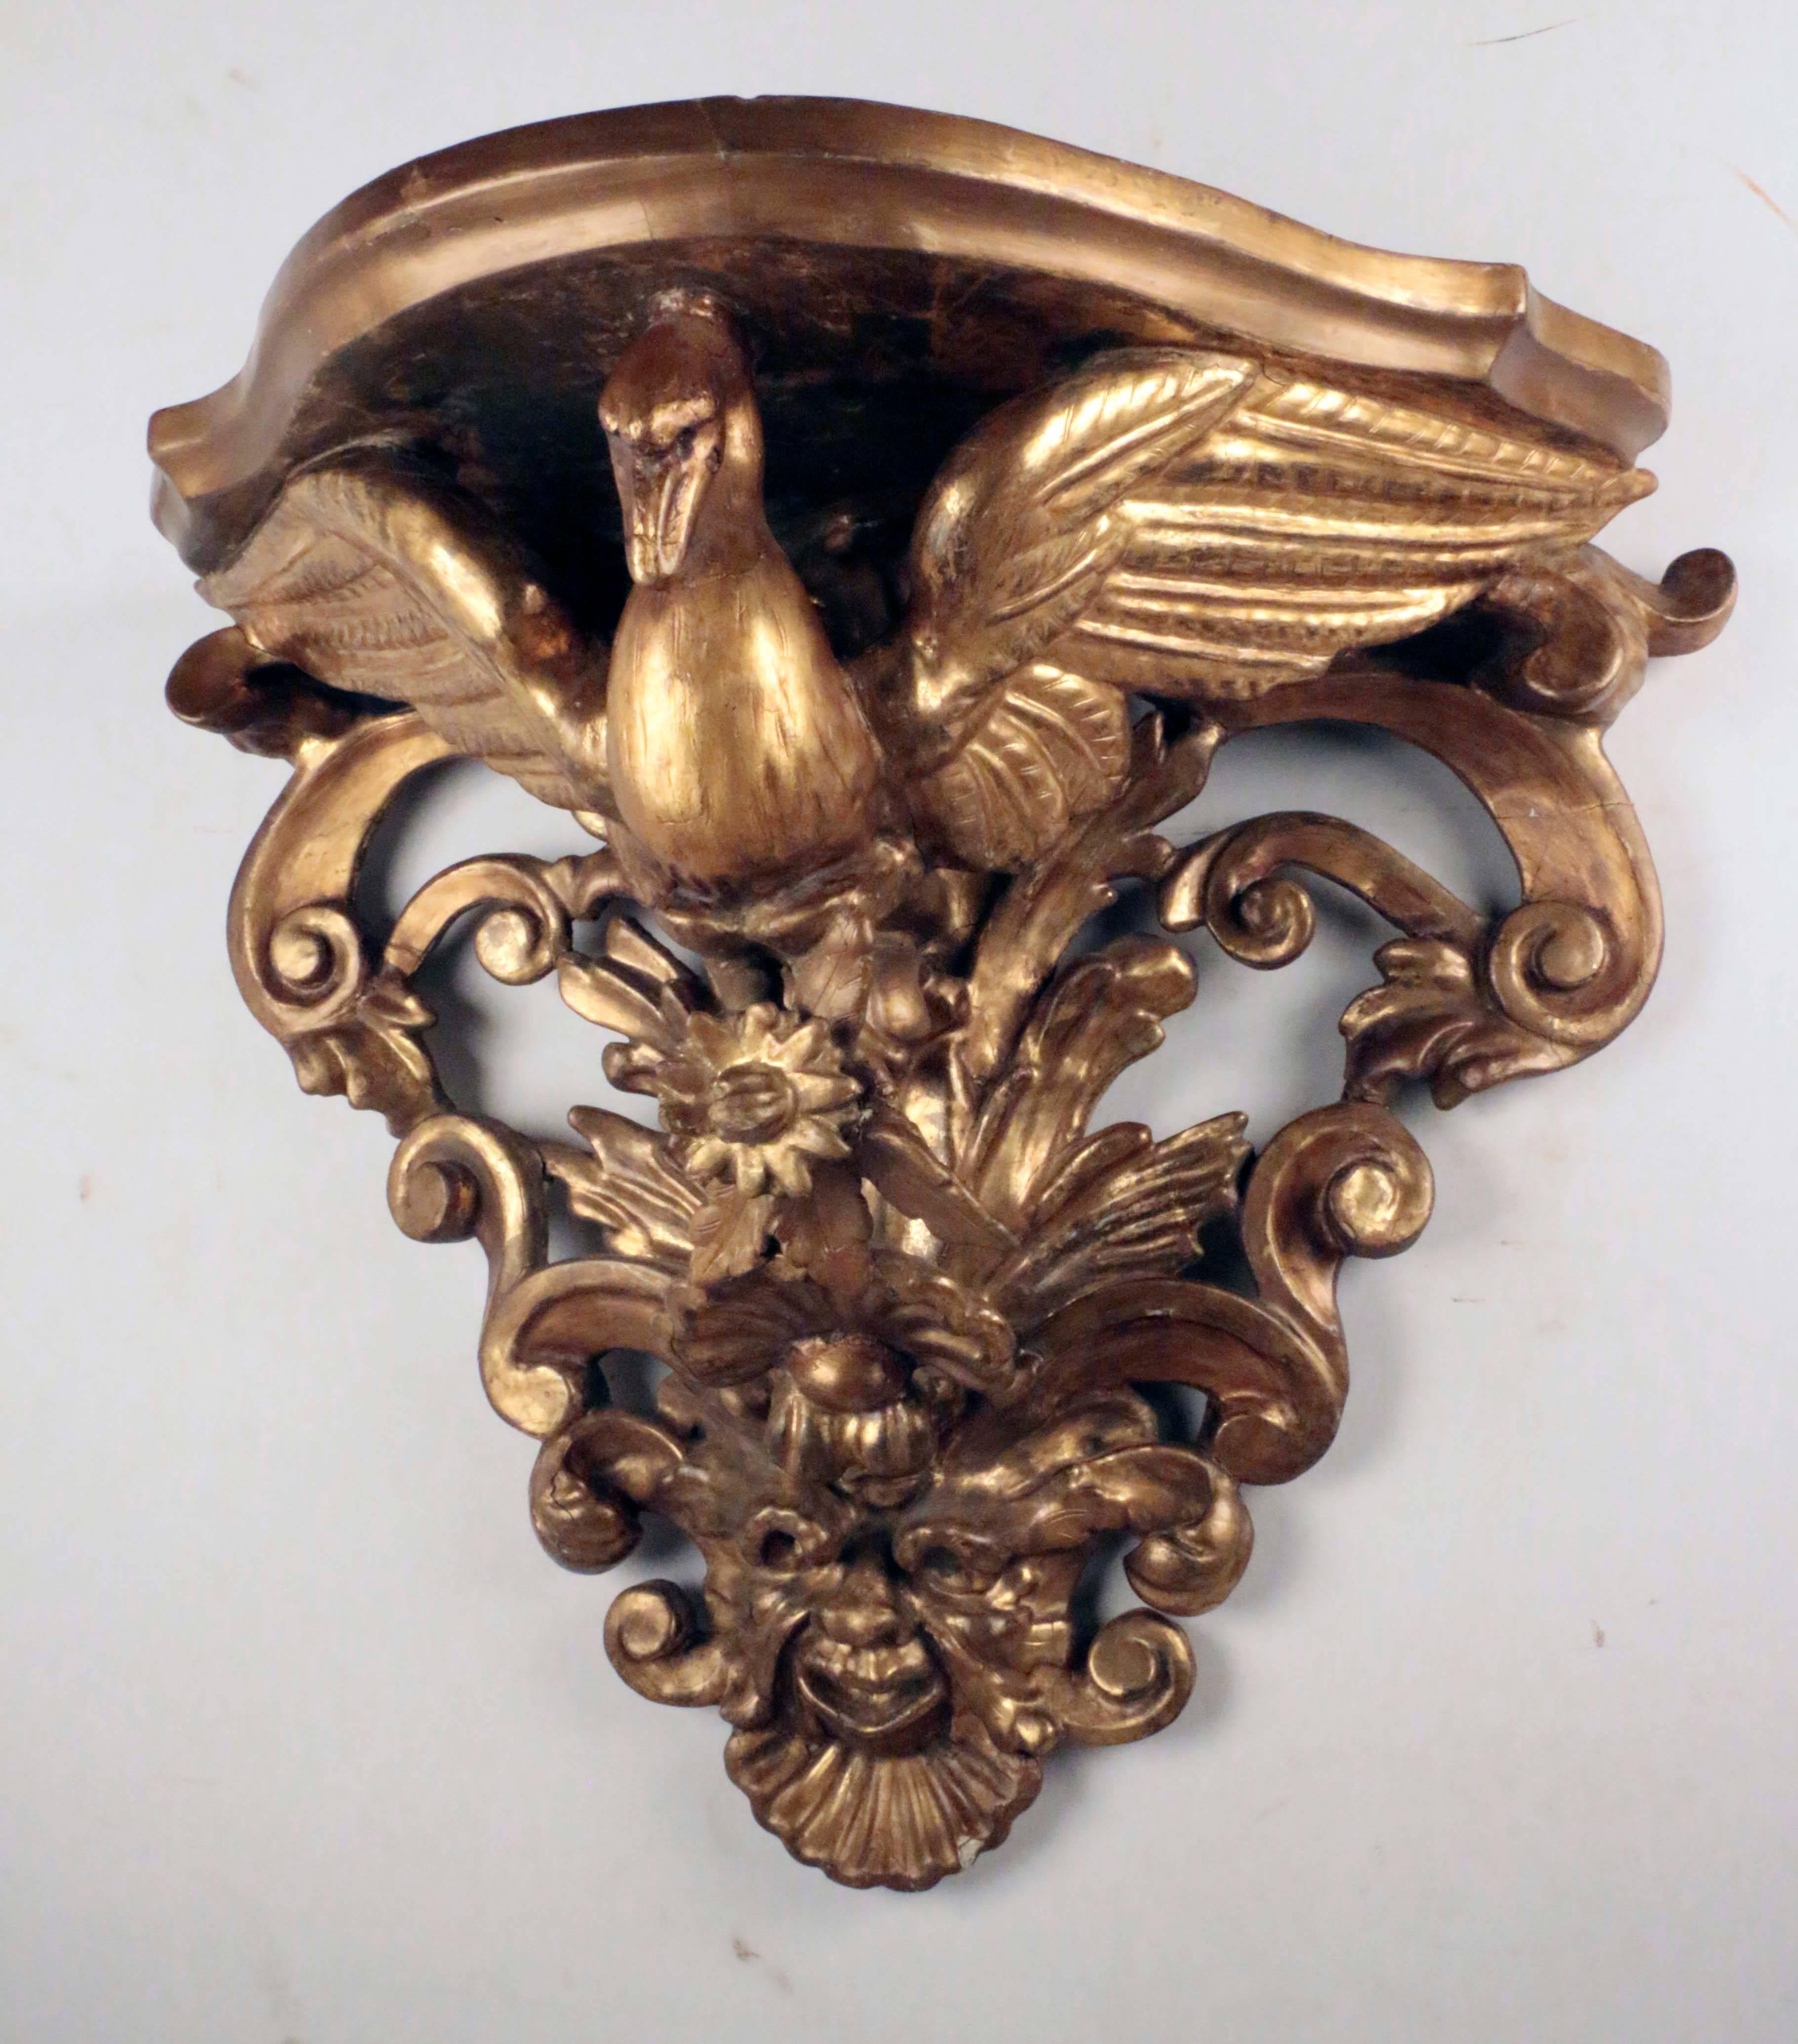 Pair of Italian giltwood wall brackets, each shelf supported by
a Ho Ho bird feeding on grapes  against an acanthus leaf background. 